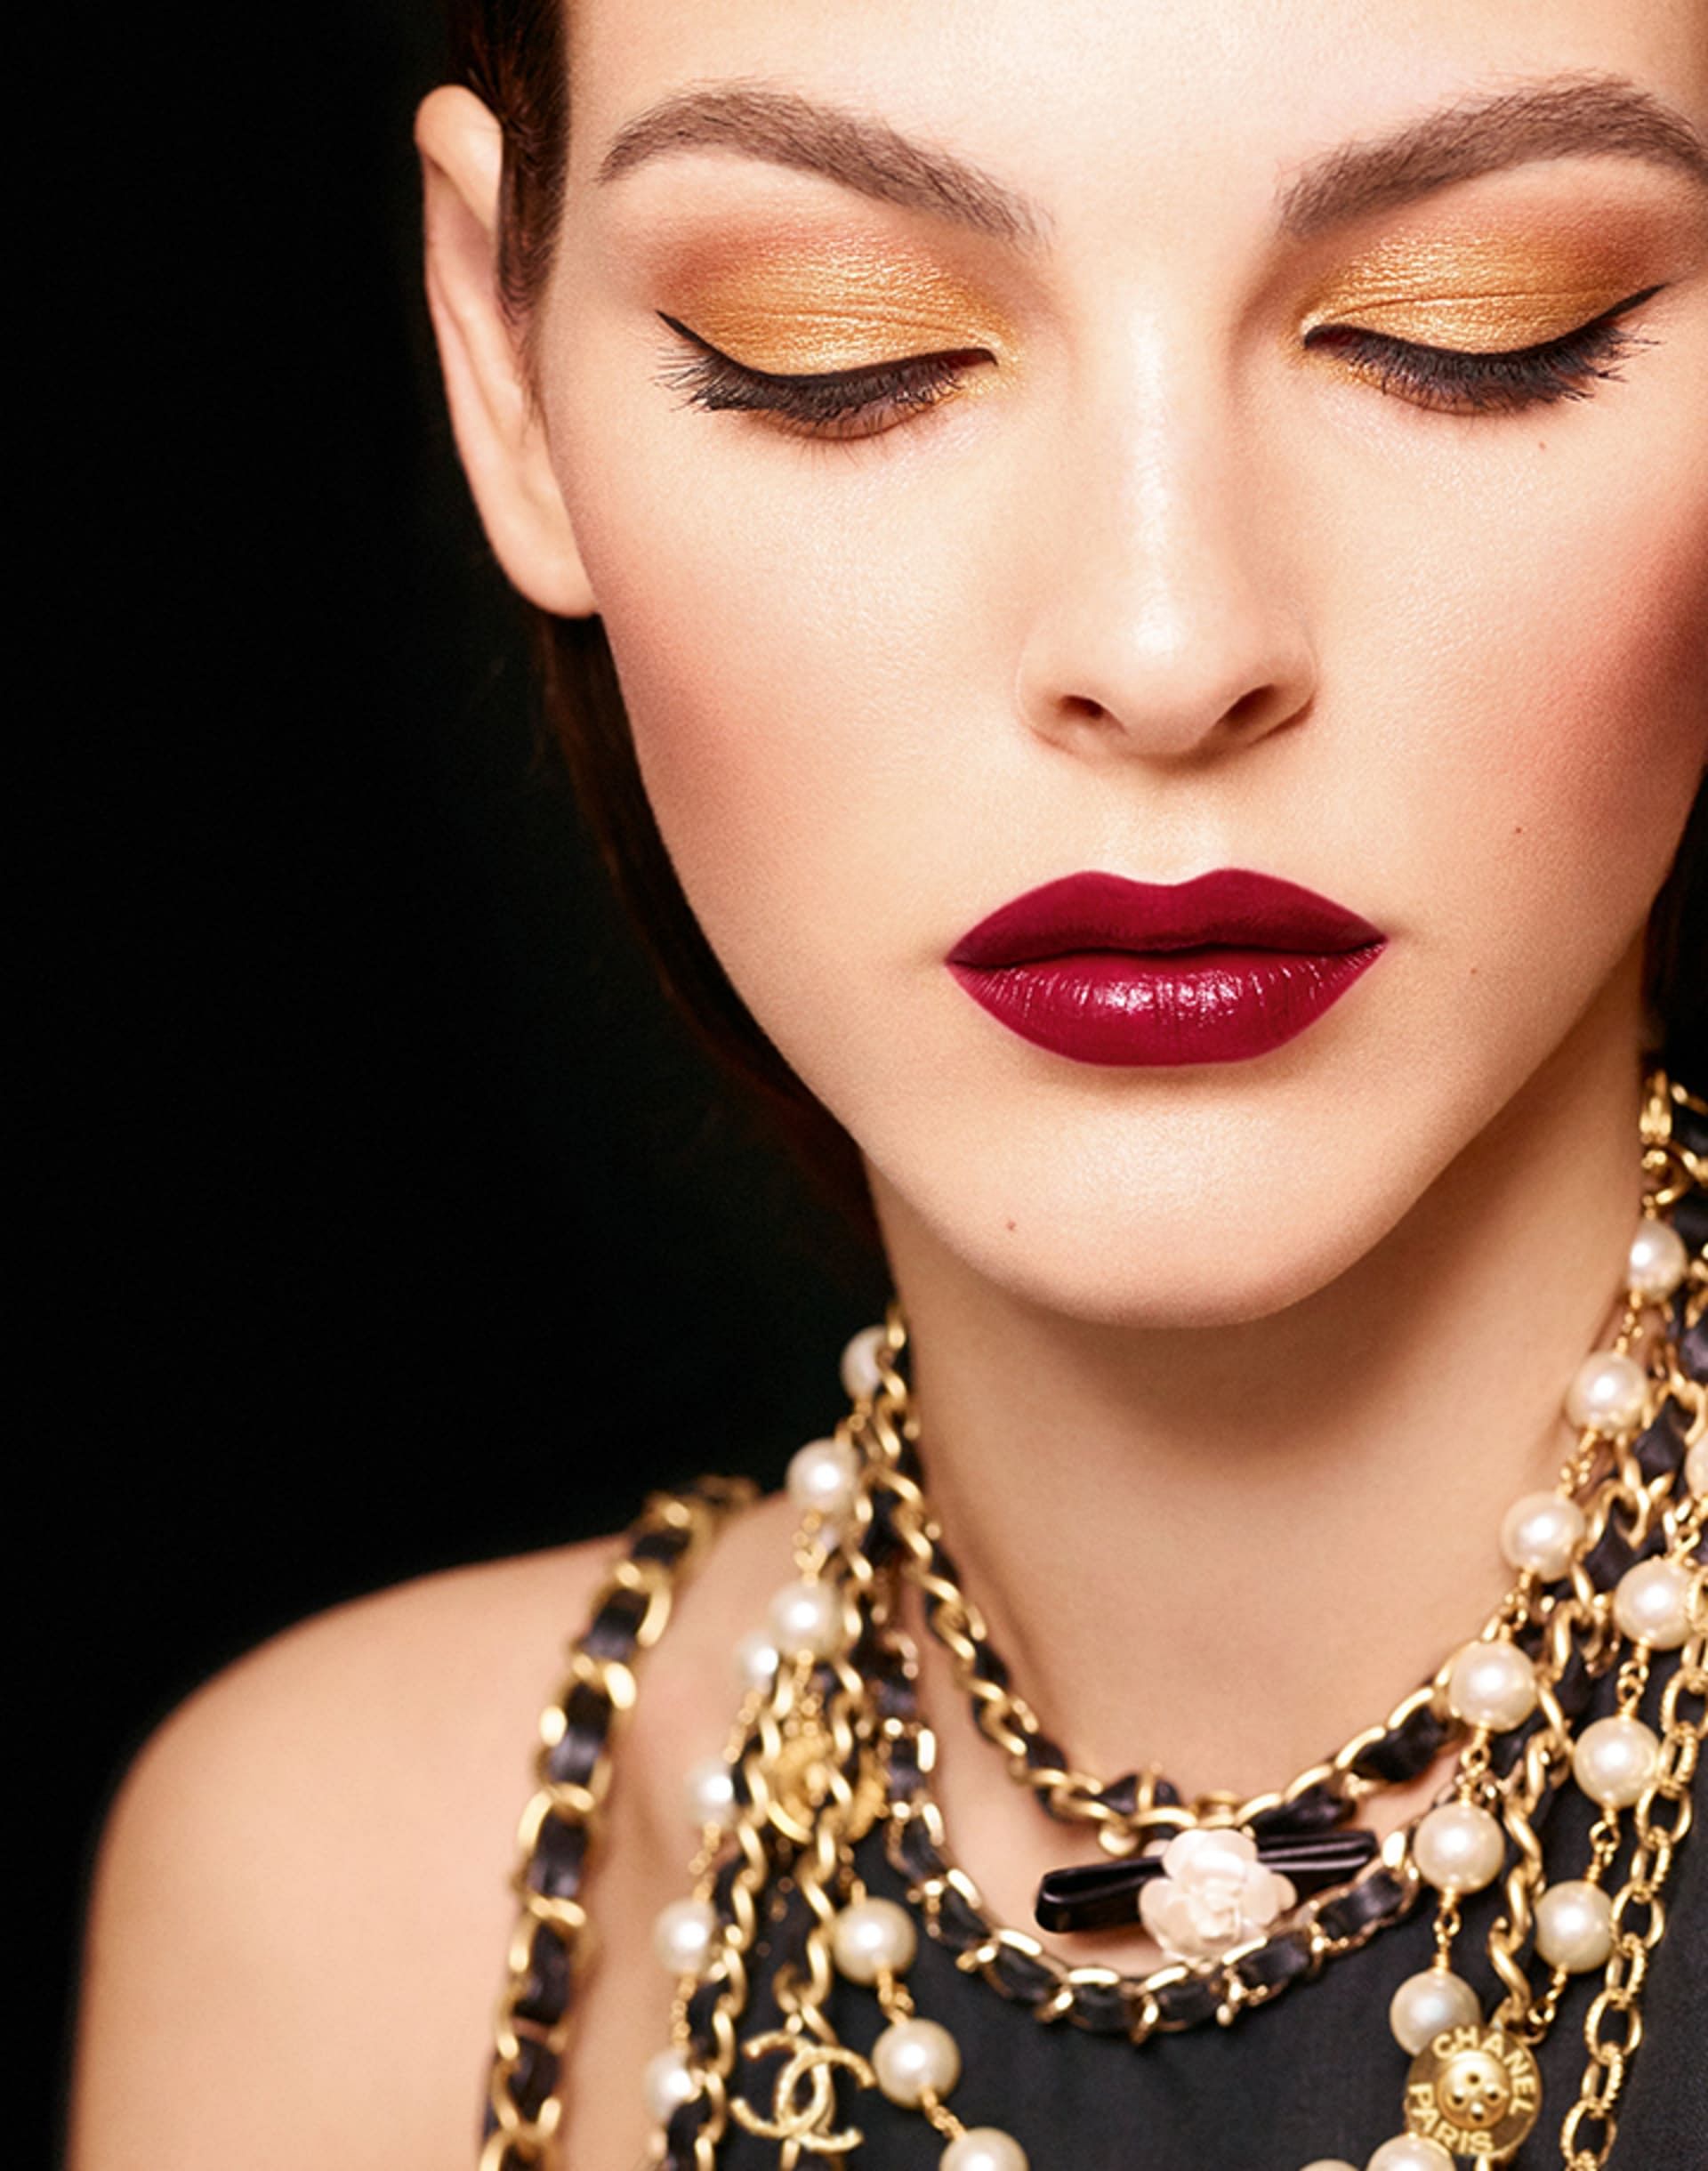 A radiant holiday makeup look achieved using Chanel’s new Les Chaines d’Or de Chanel collection.